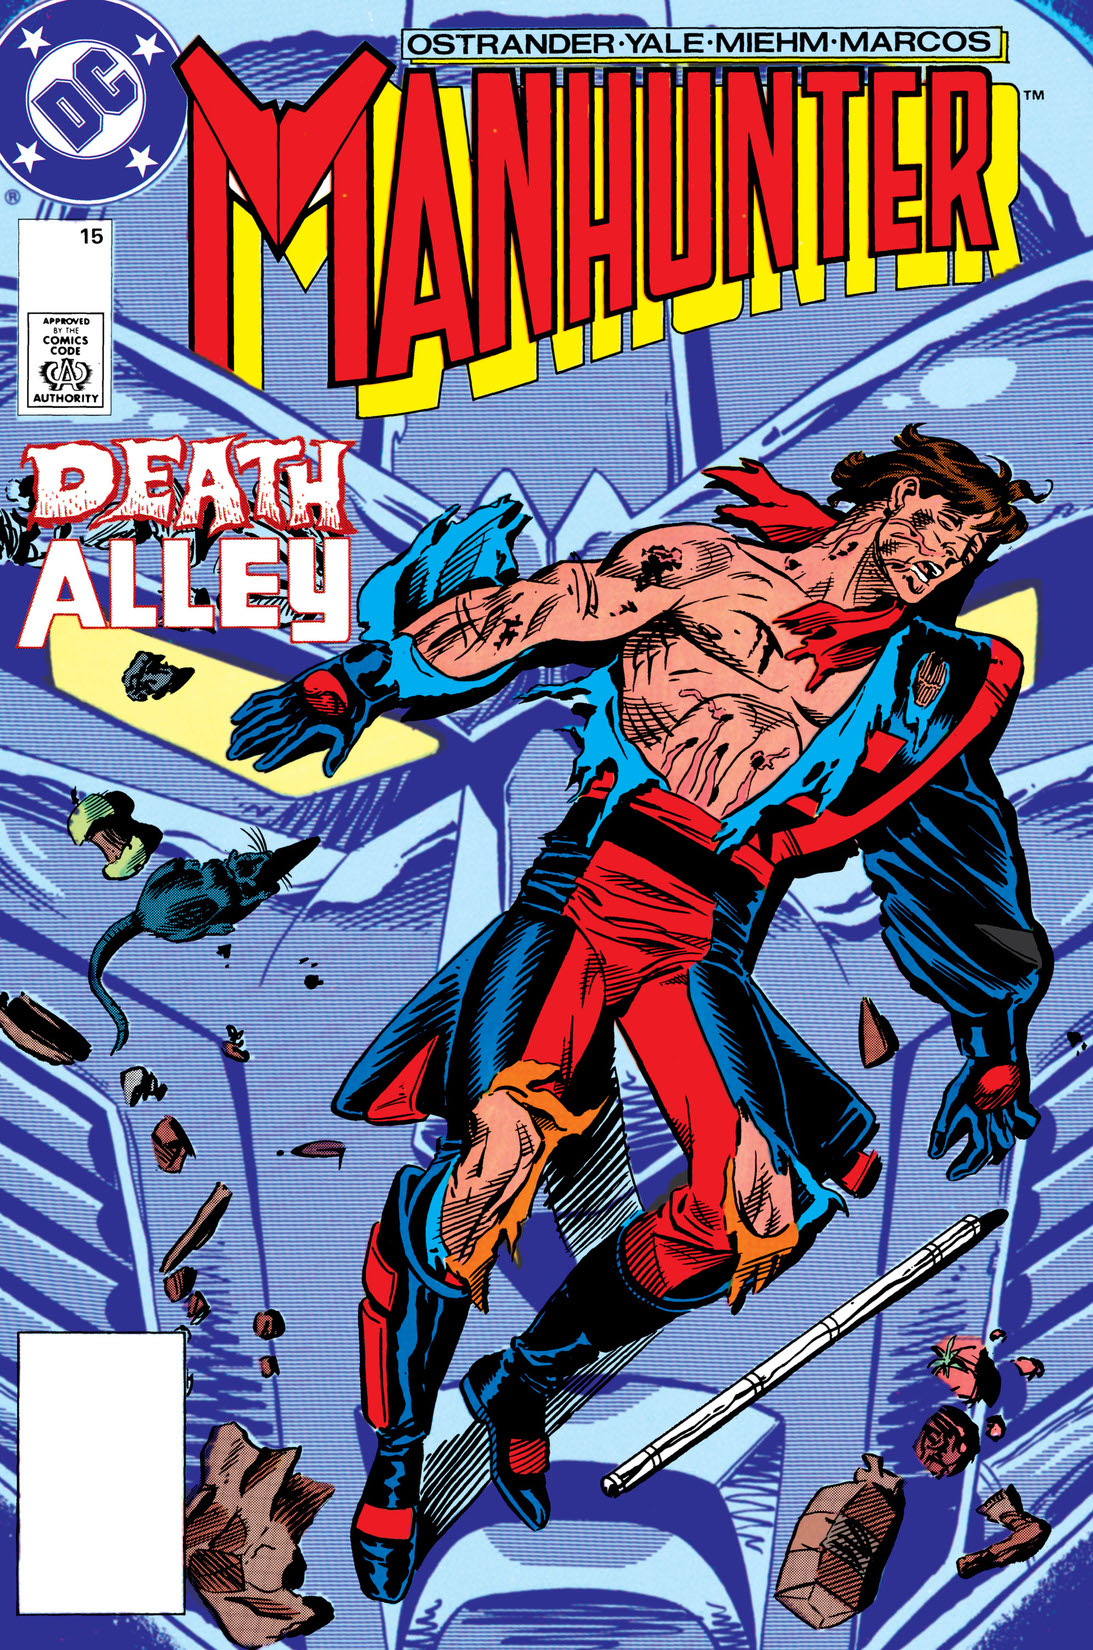 Manhunter (1988-) #15 preview images